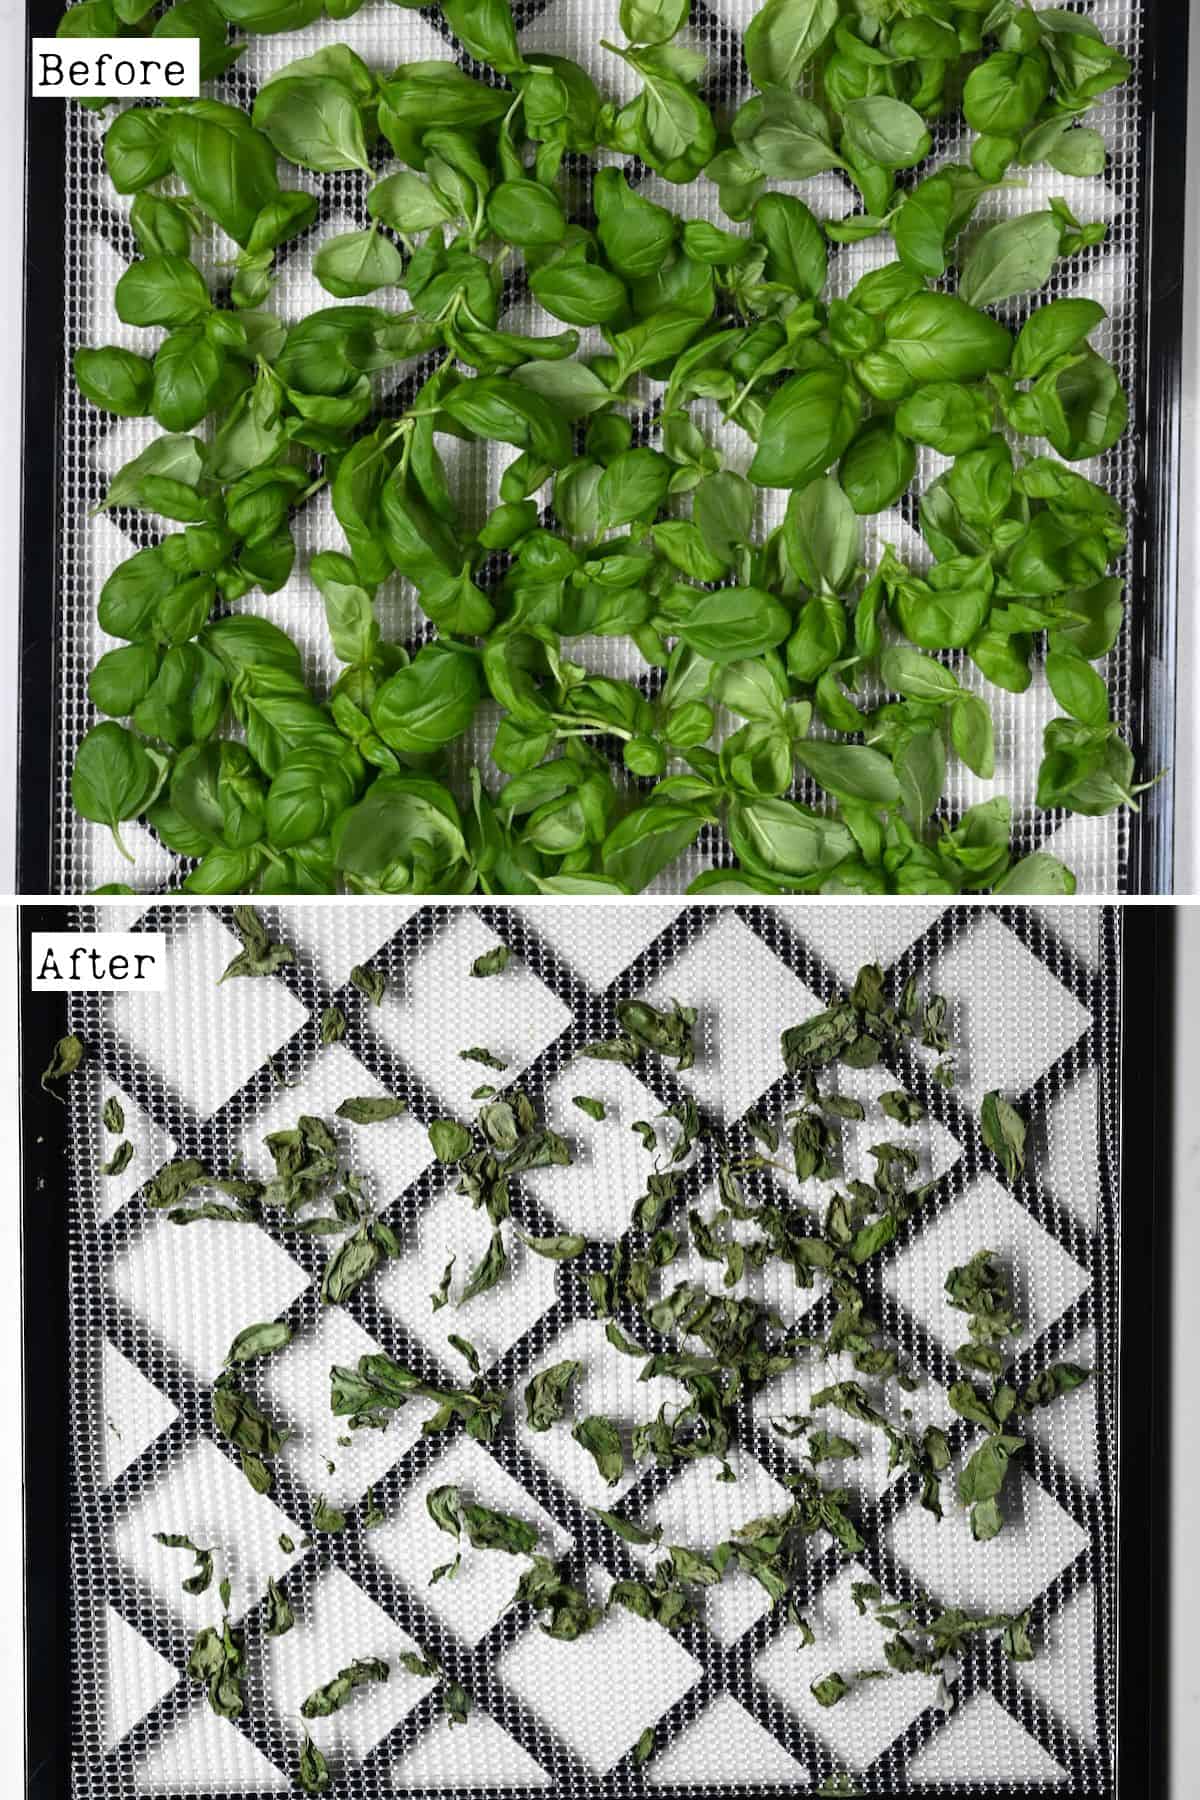 Before and after drying basil leaves